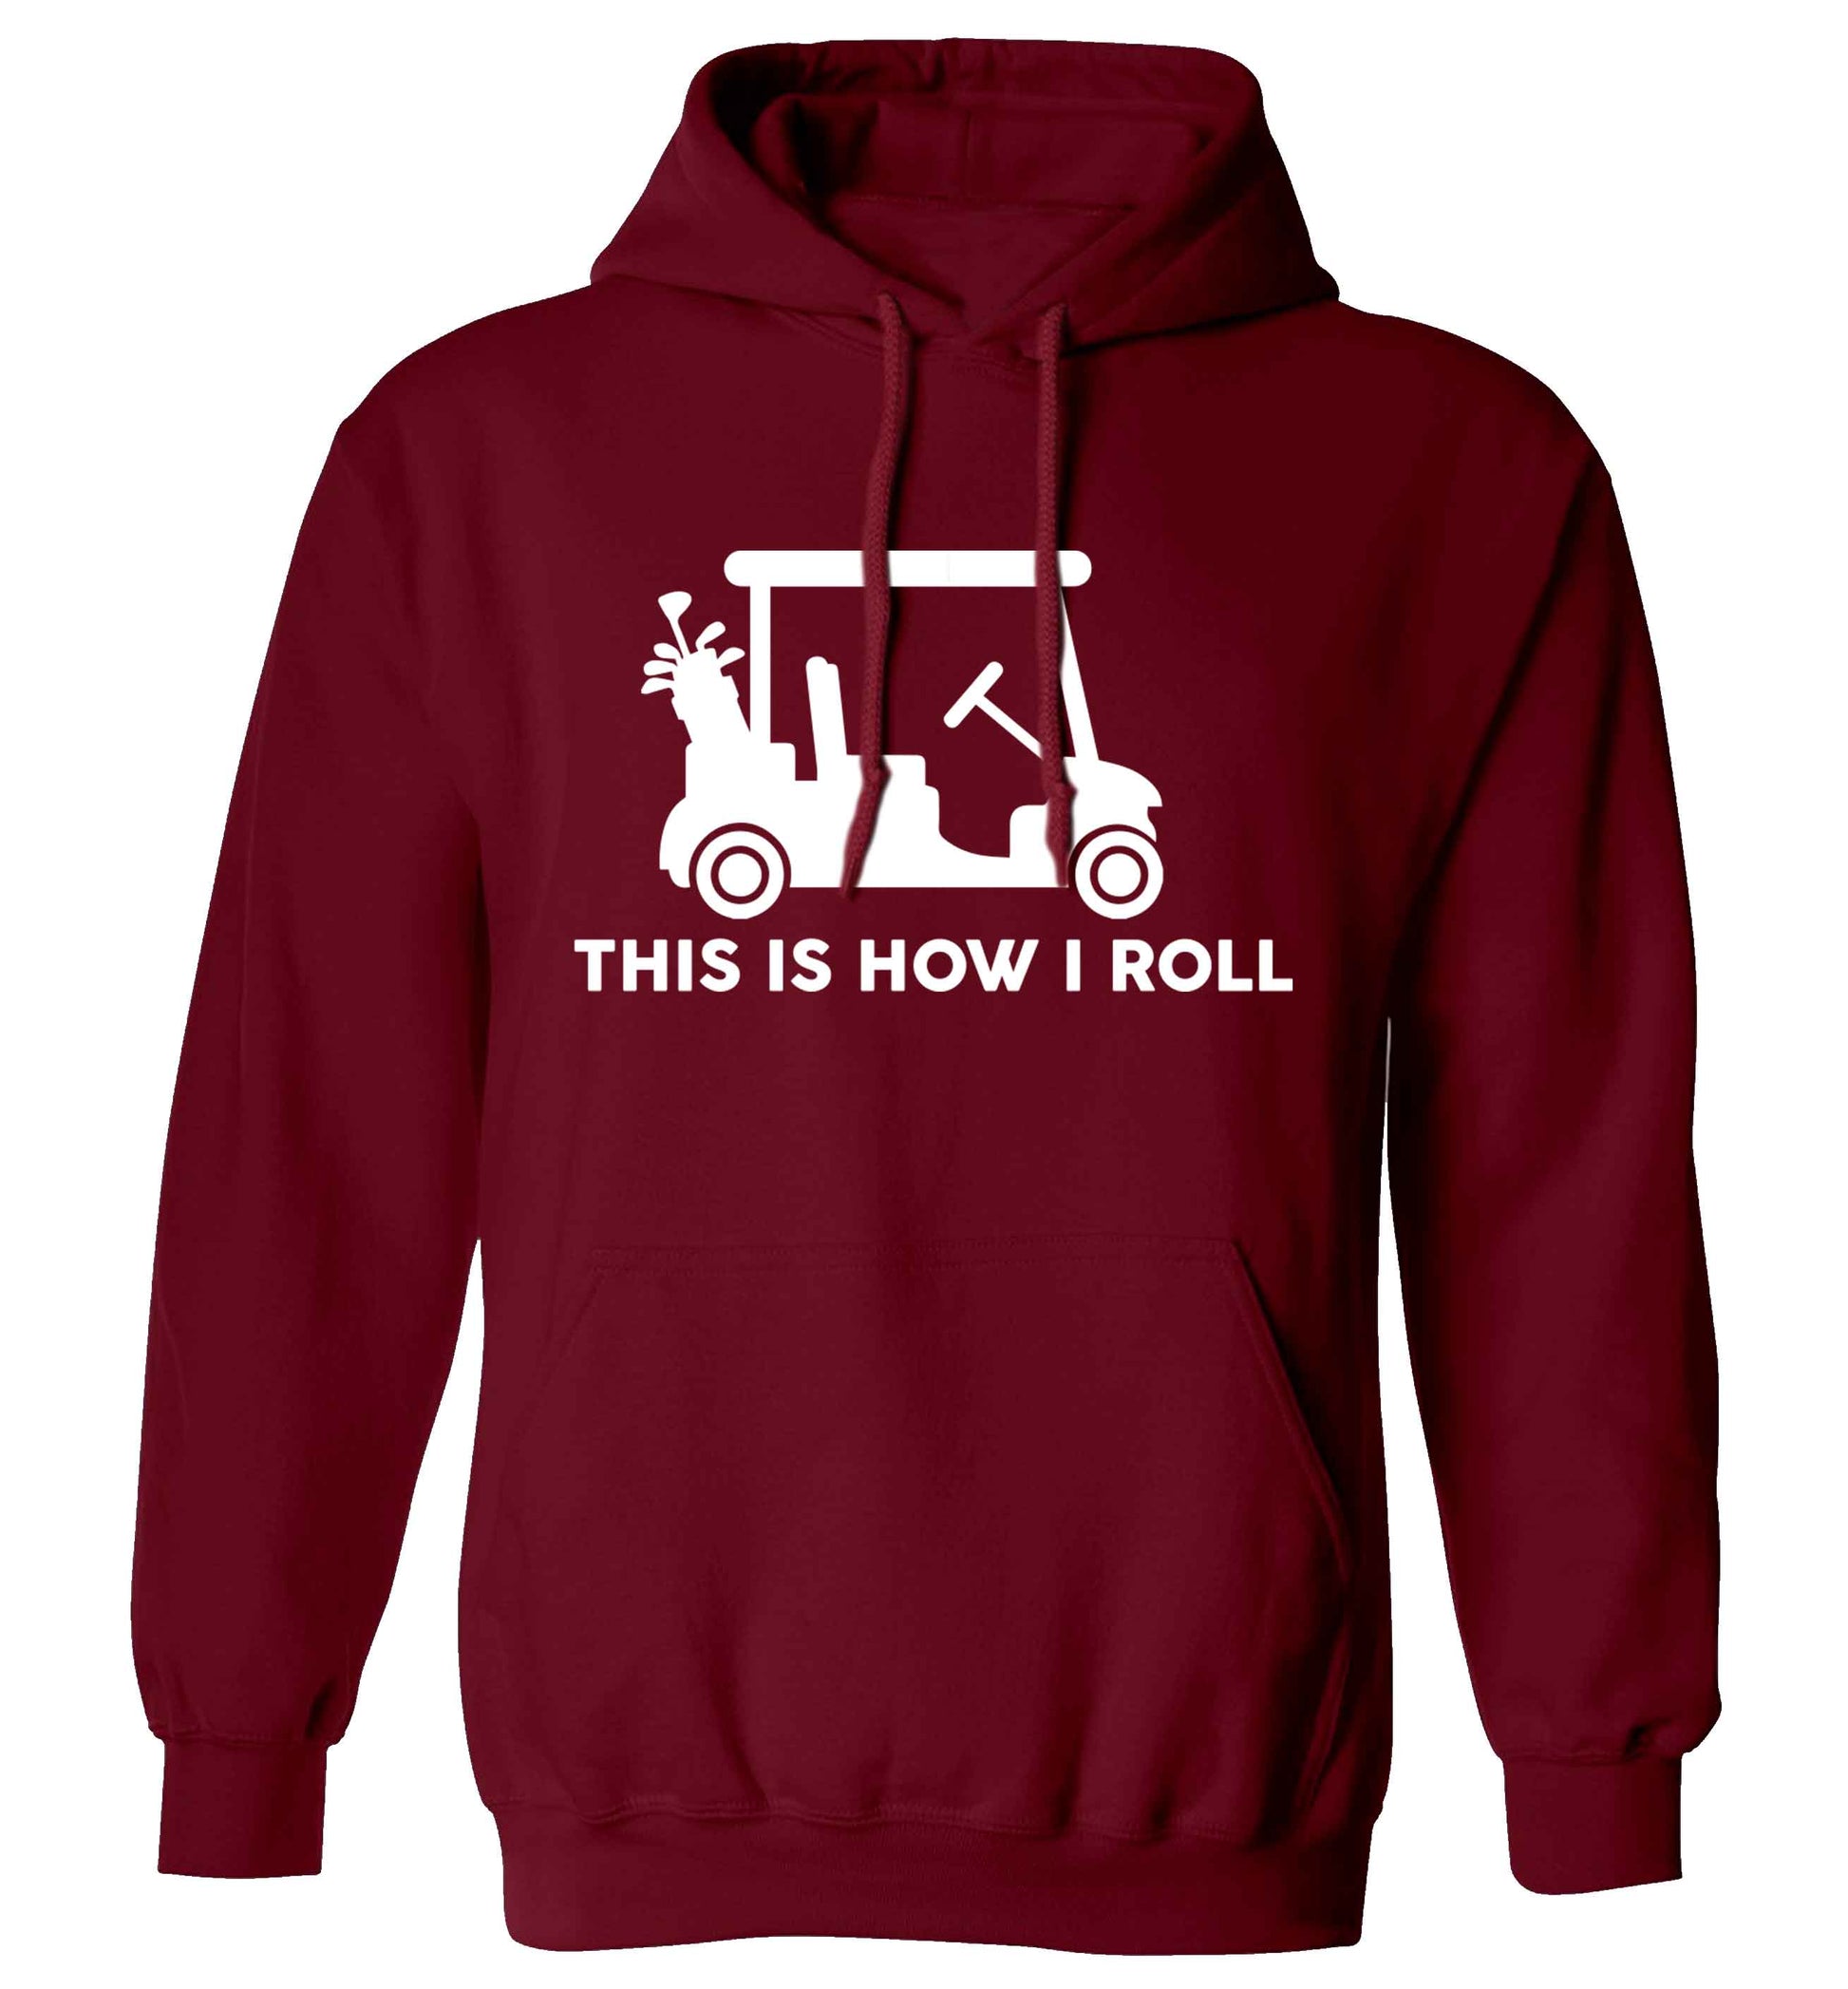 This is how I roll golf cart adults unisex maroon hoodie 2XL